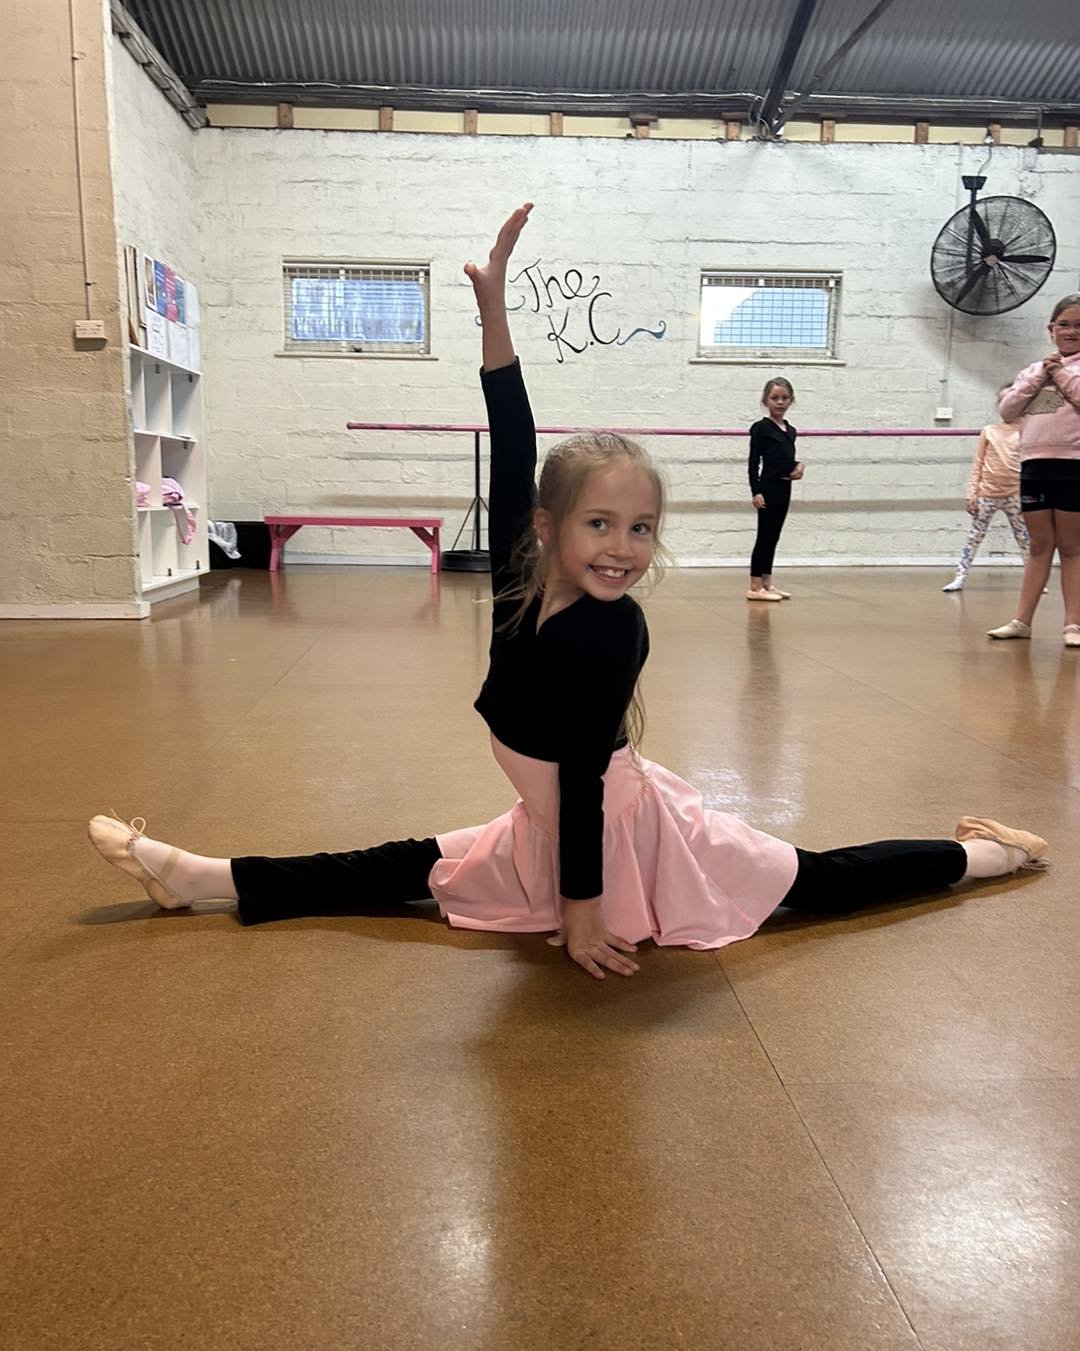 Splits both ways!!!! Go Paige!!!! Paige has been dancing with us since she was 3yrs old &amp; works so hard in class &amp; at home. Her skills have improved out of sight &amp; we are very proud of her. She is always so positive &amp; happy - a joy to